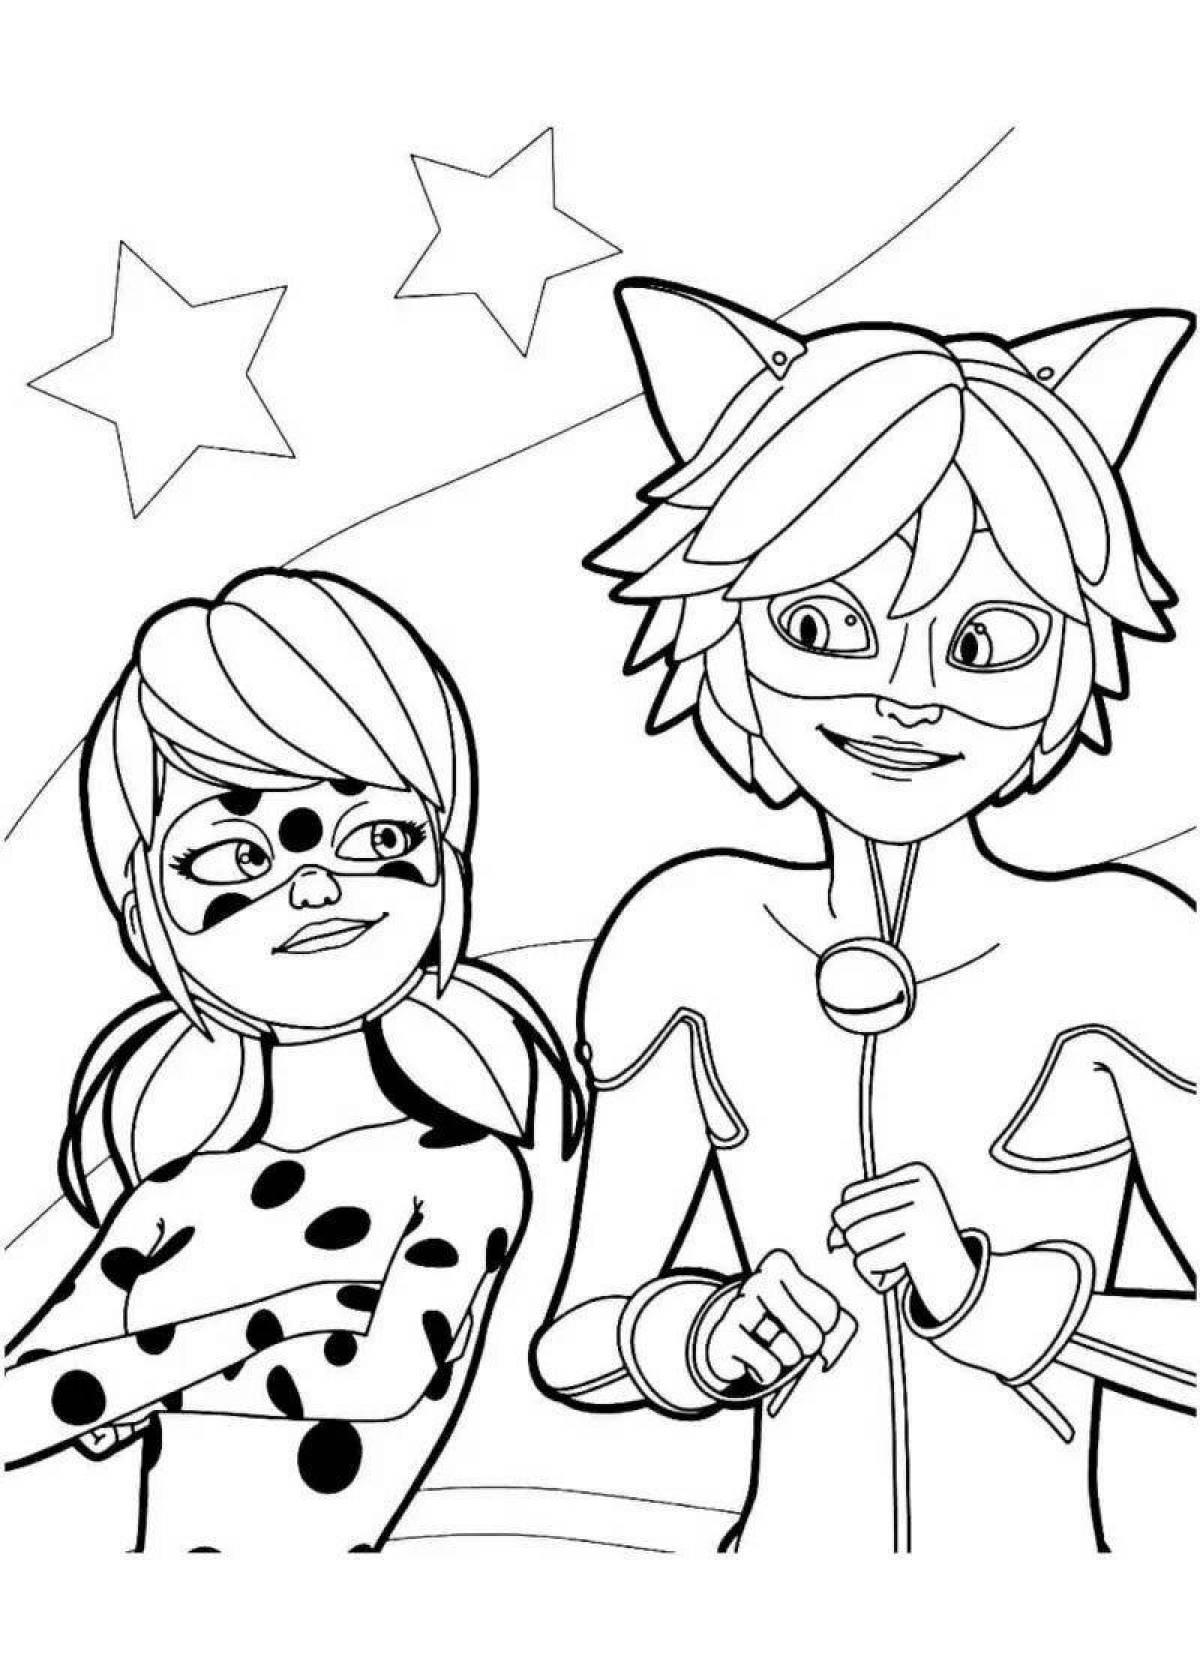 Cute cat and ladybug coloring book